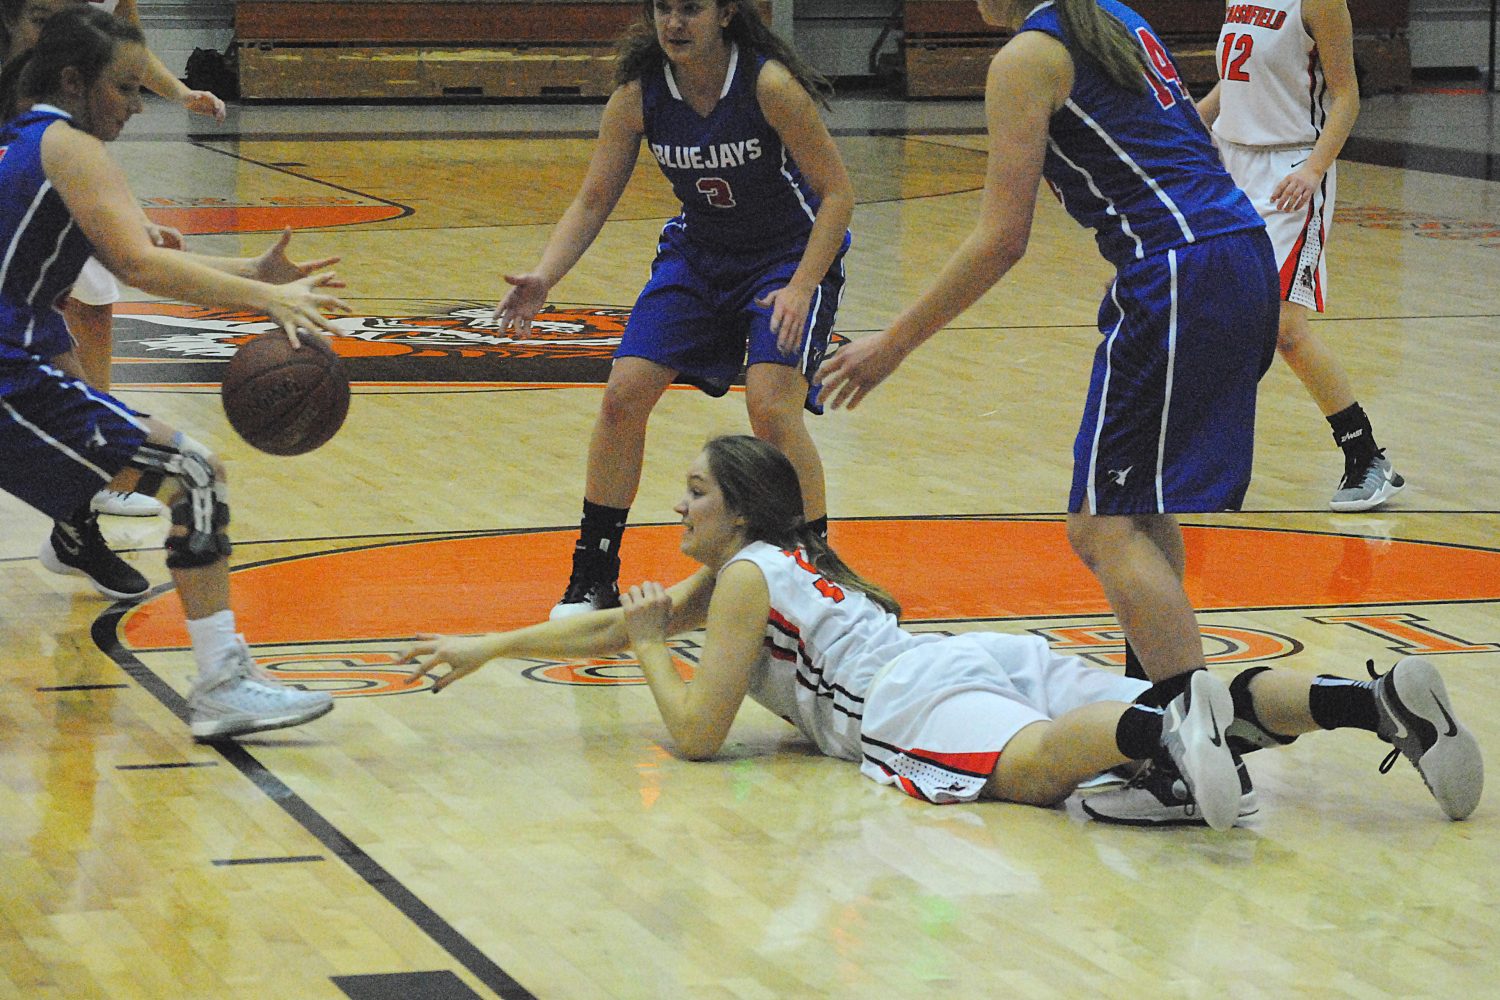 Marshfield's Sophie Koehn tries to chase down a loose ball during the Tigers' win over Merrill on Tuesday at Marshfield High School.